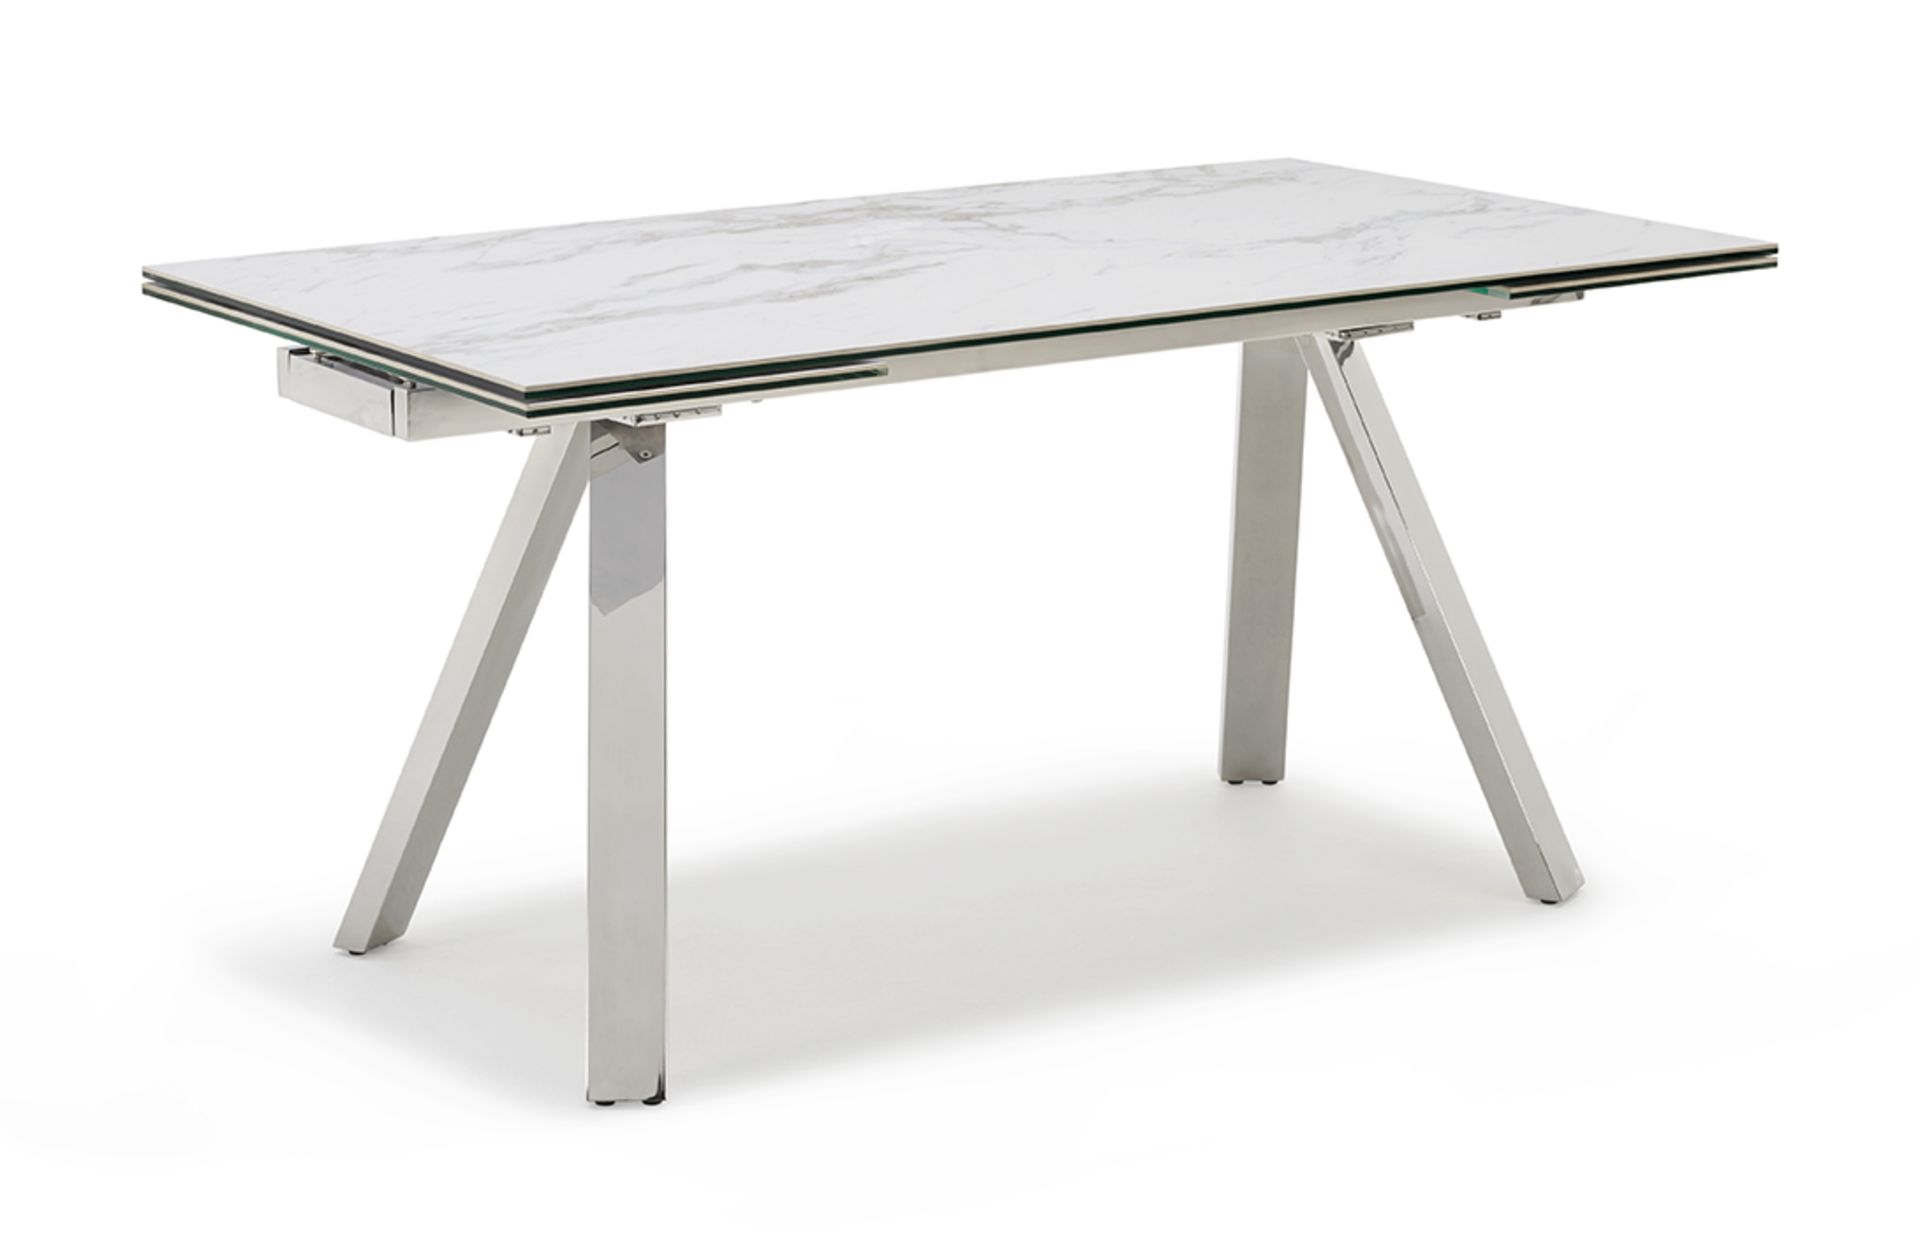 Stromboli Dining Table by Kesterport This glamorous contemporary dining table will add sensational - Image 10 of 11